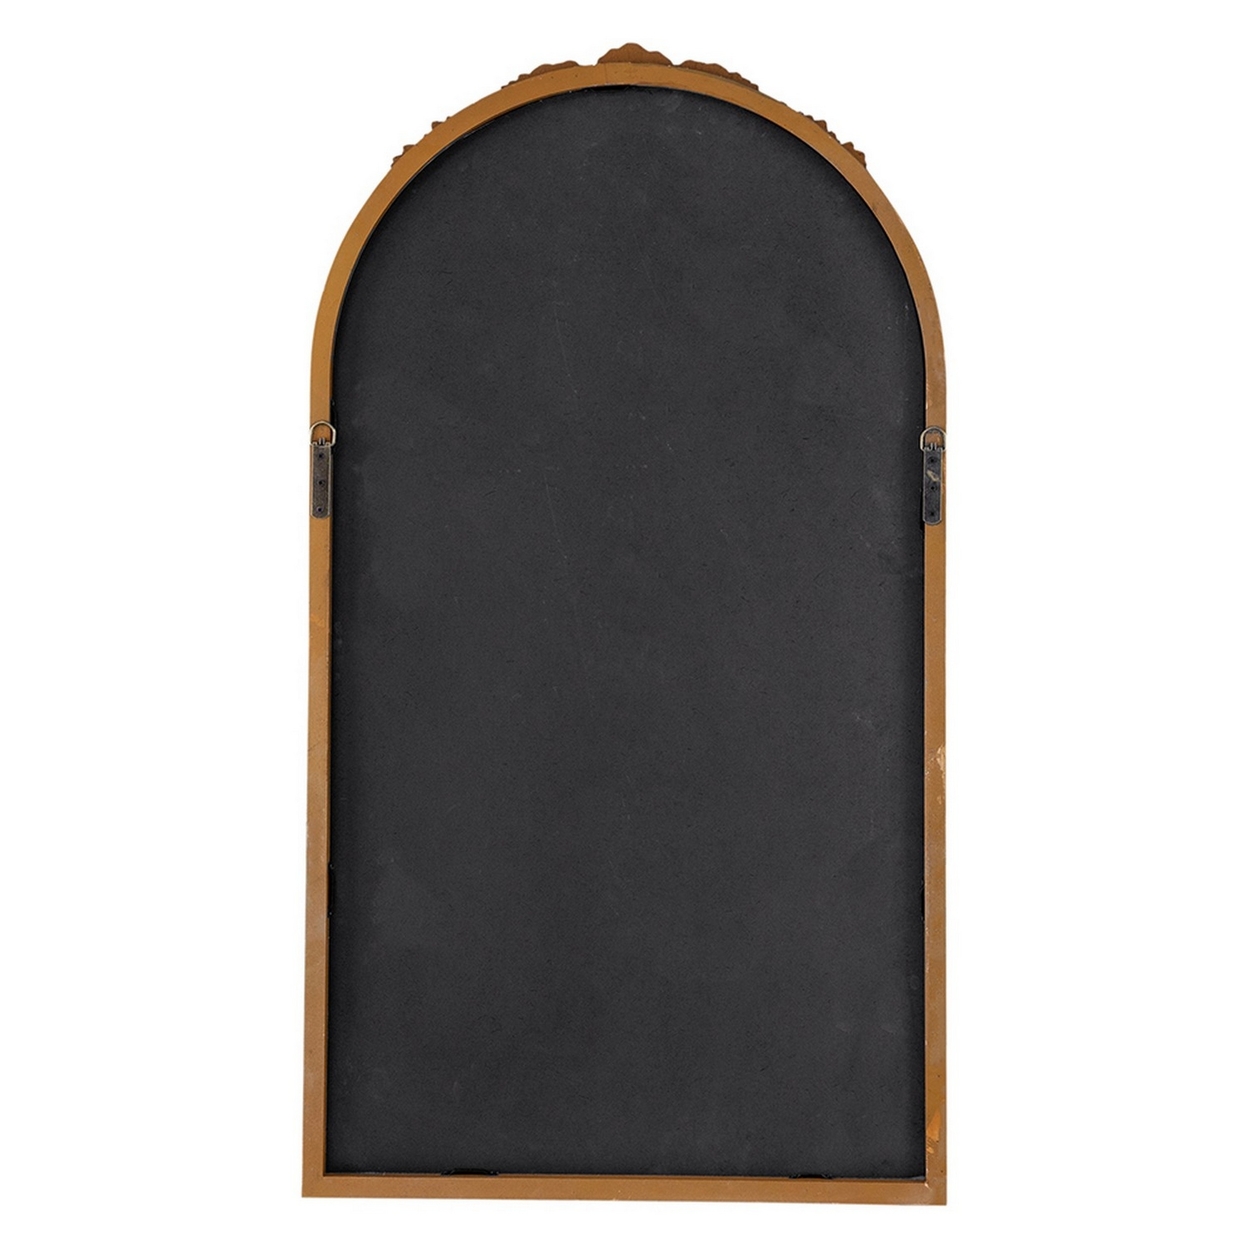 Eel 42 Inch Wall Mirror, Brown Arched Wood Frame, Hand Carved Rose Accent- Saltoro Sherpi